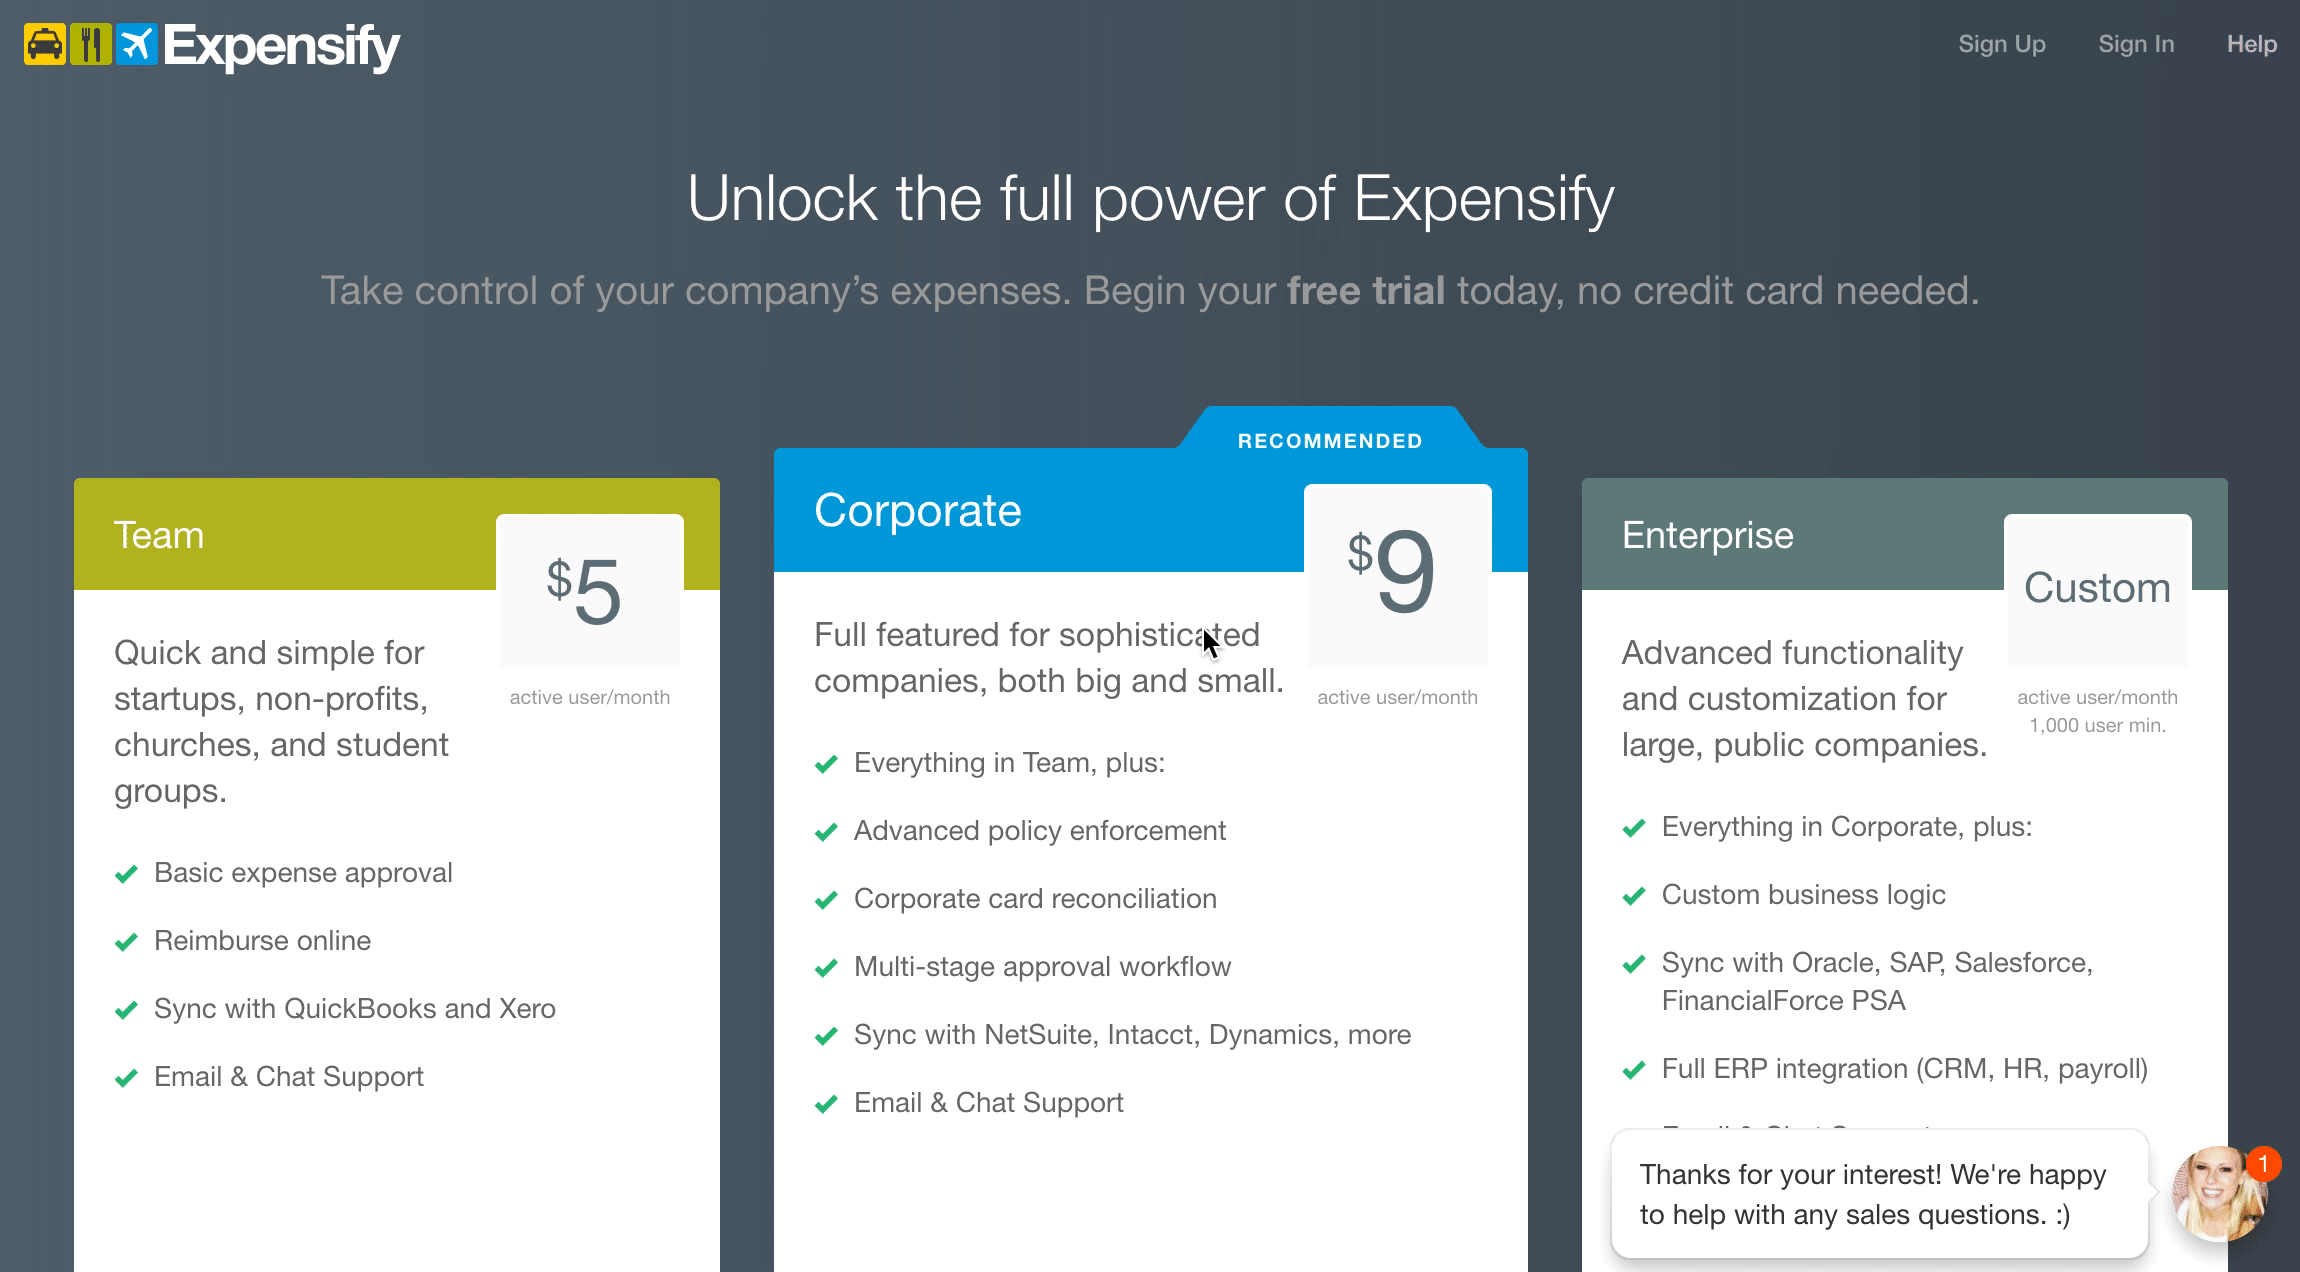 Expensify live chat